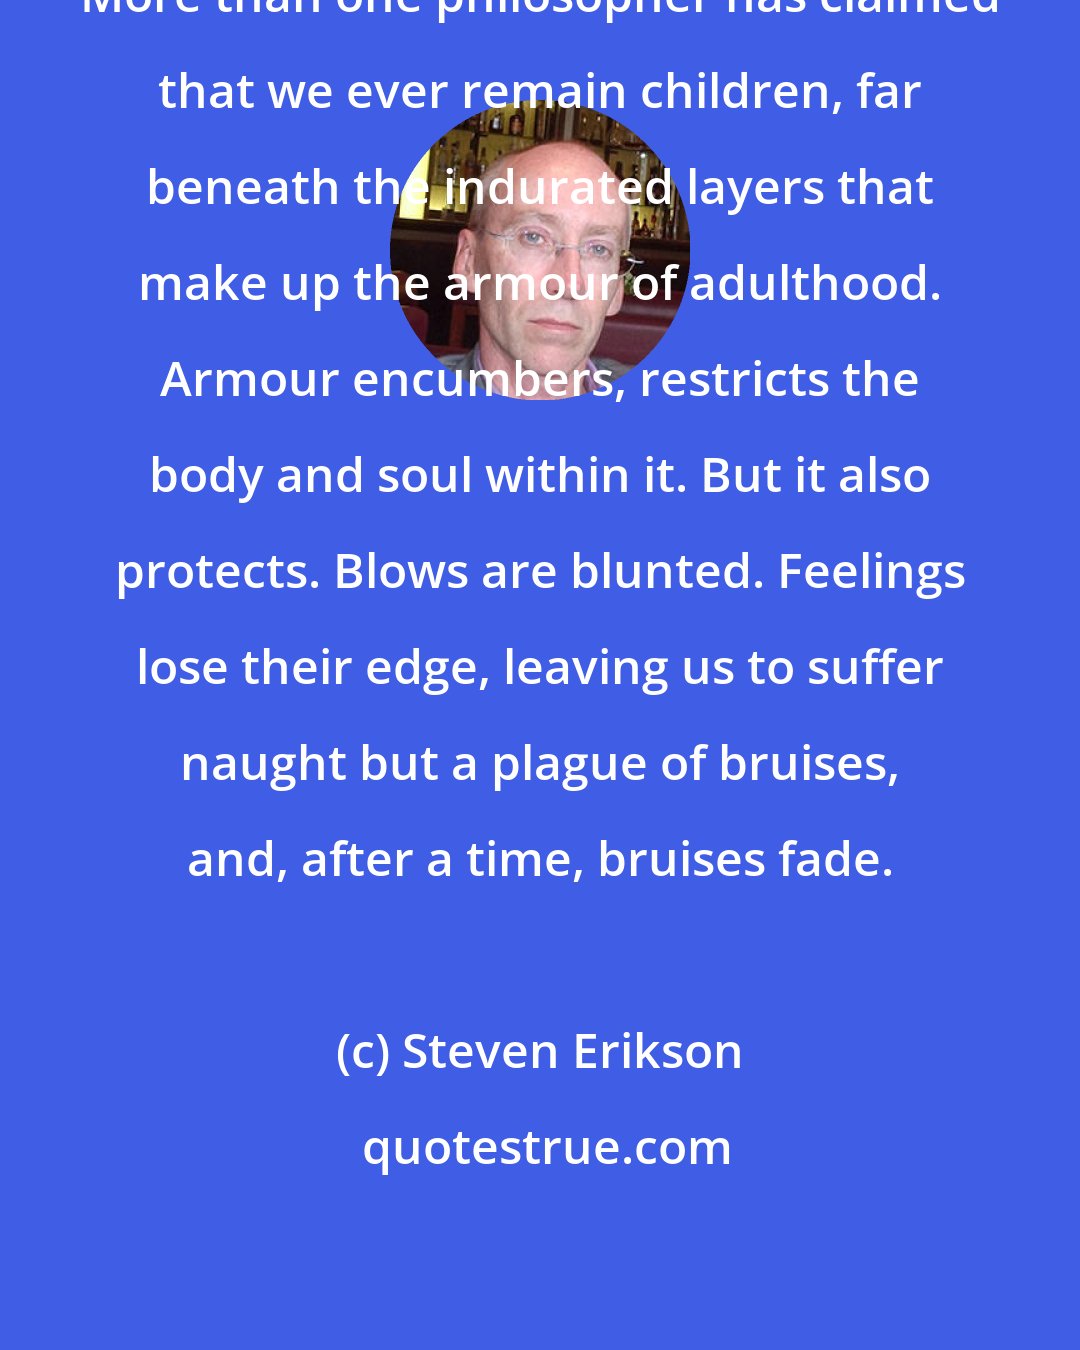 Steven Erikson: More than one philosopher has claimed that we ever remain children, far beneath the indurated layers that make up the armour of adulthood. Armour encumbers, restricts the body and soul within it. But it also protects. Blows are blunted. Feelings lose their edge, leaving us to suffer naught but a plague of bruises, and, after a time, bruises fade.